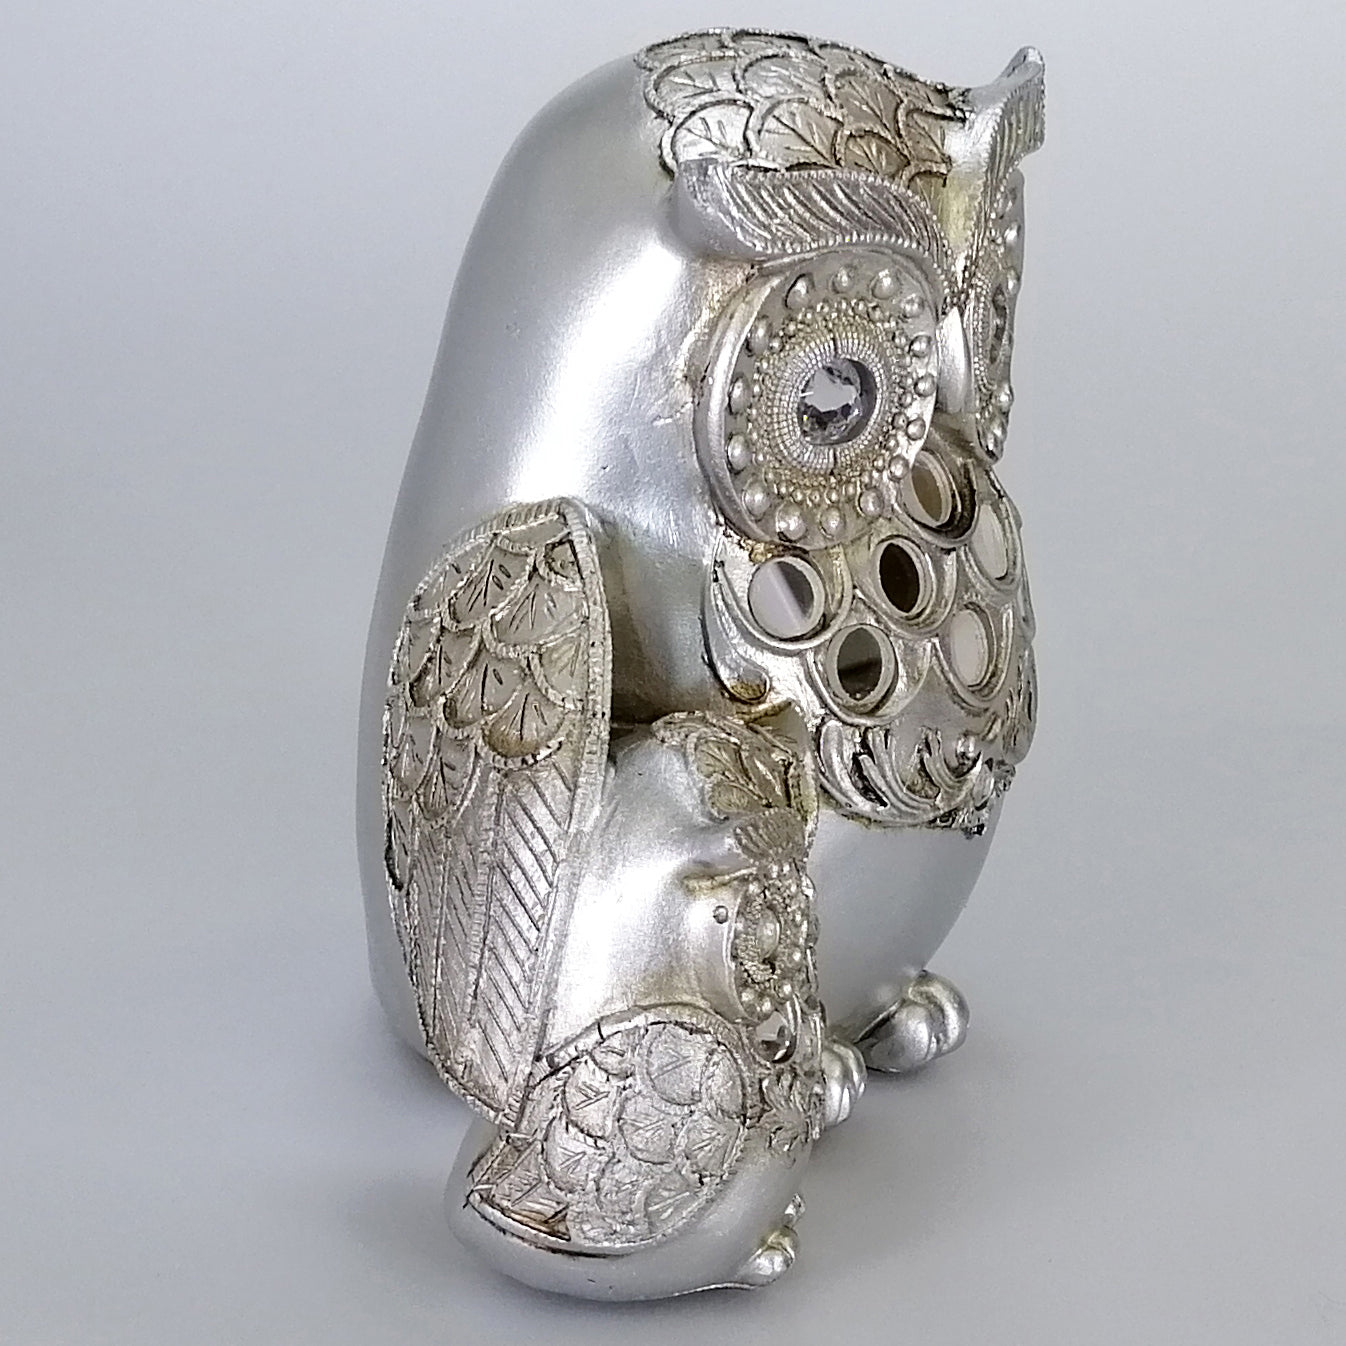 Owl with Chick Figurine - Silver-Look